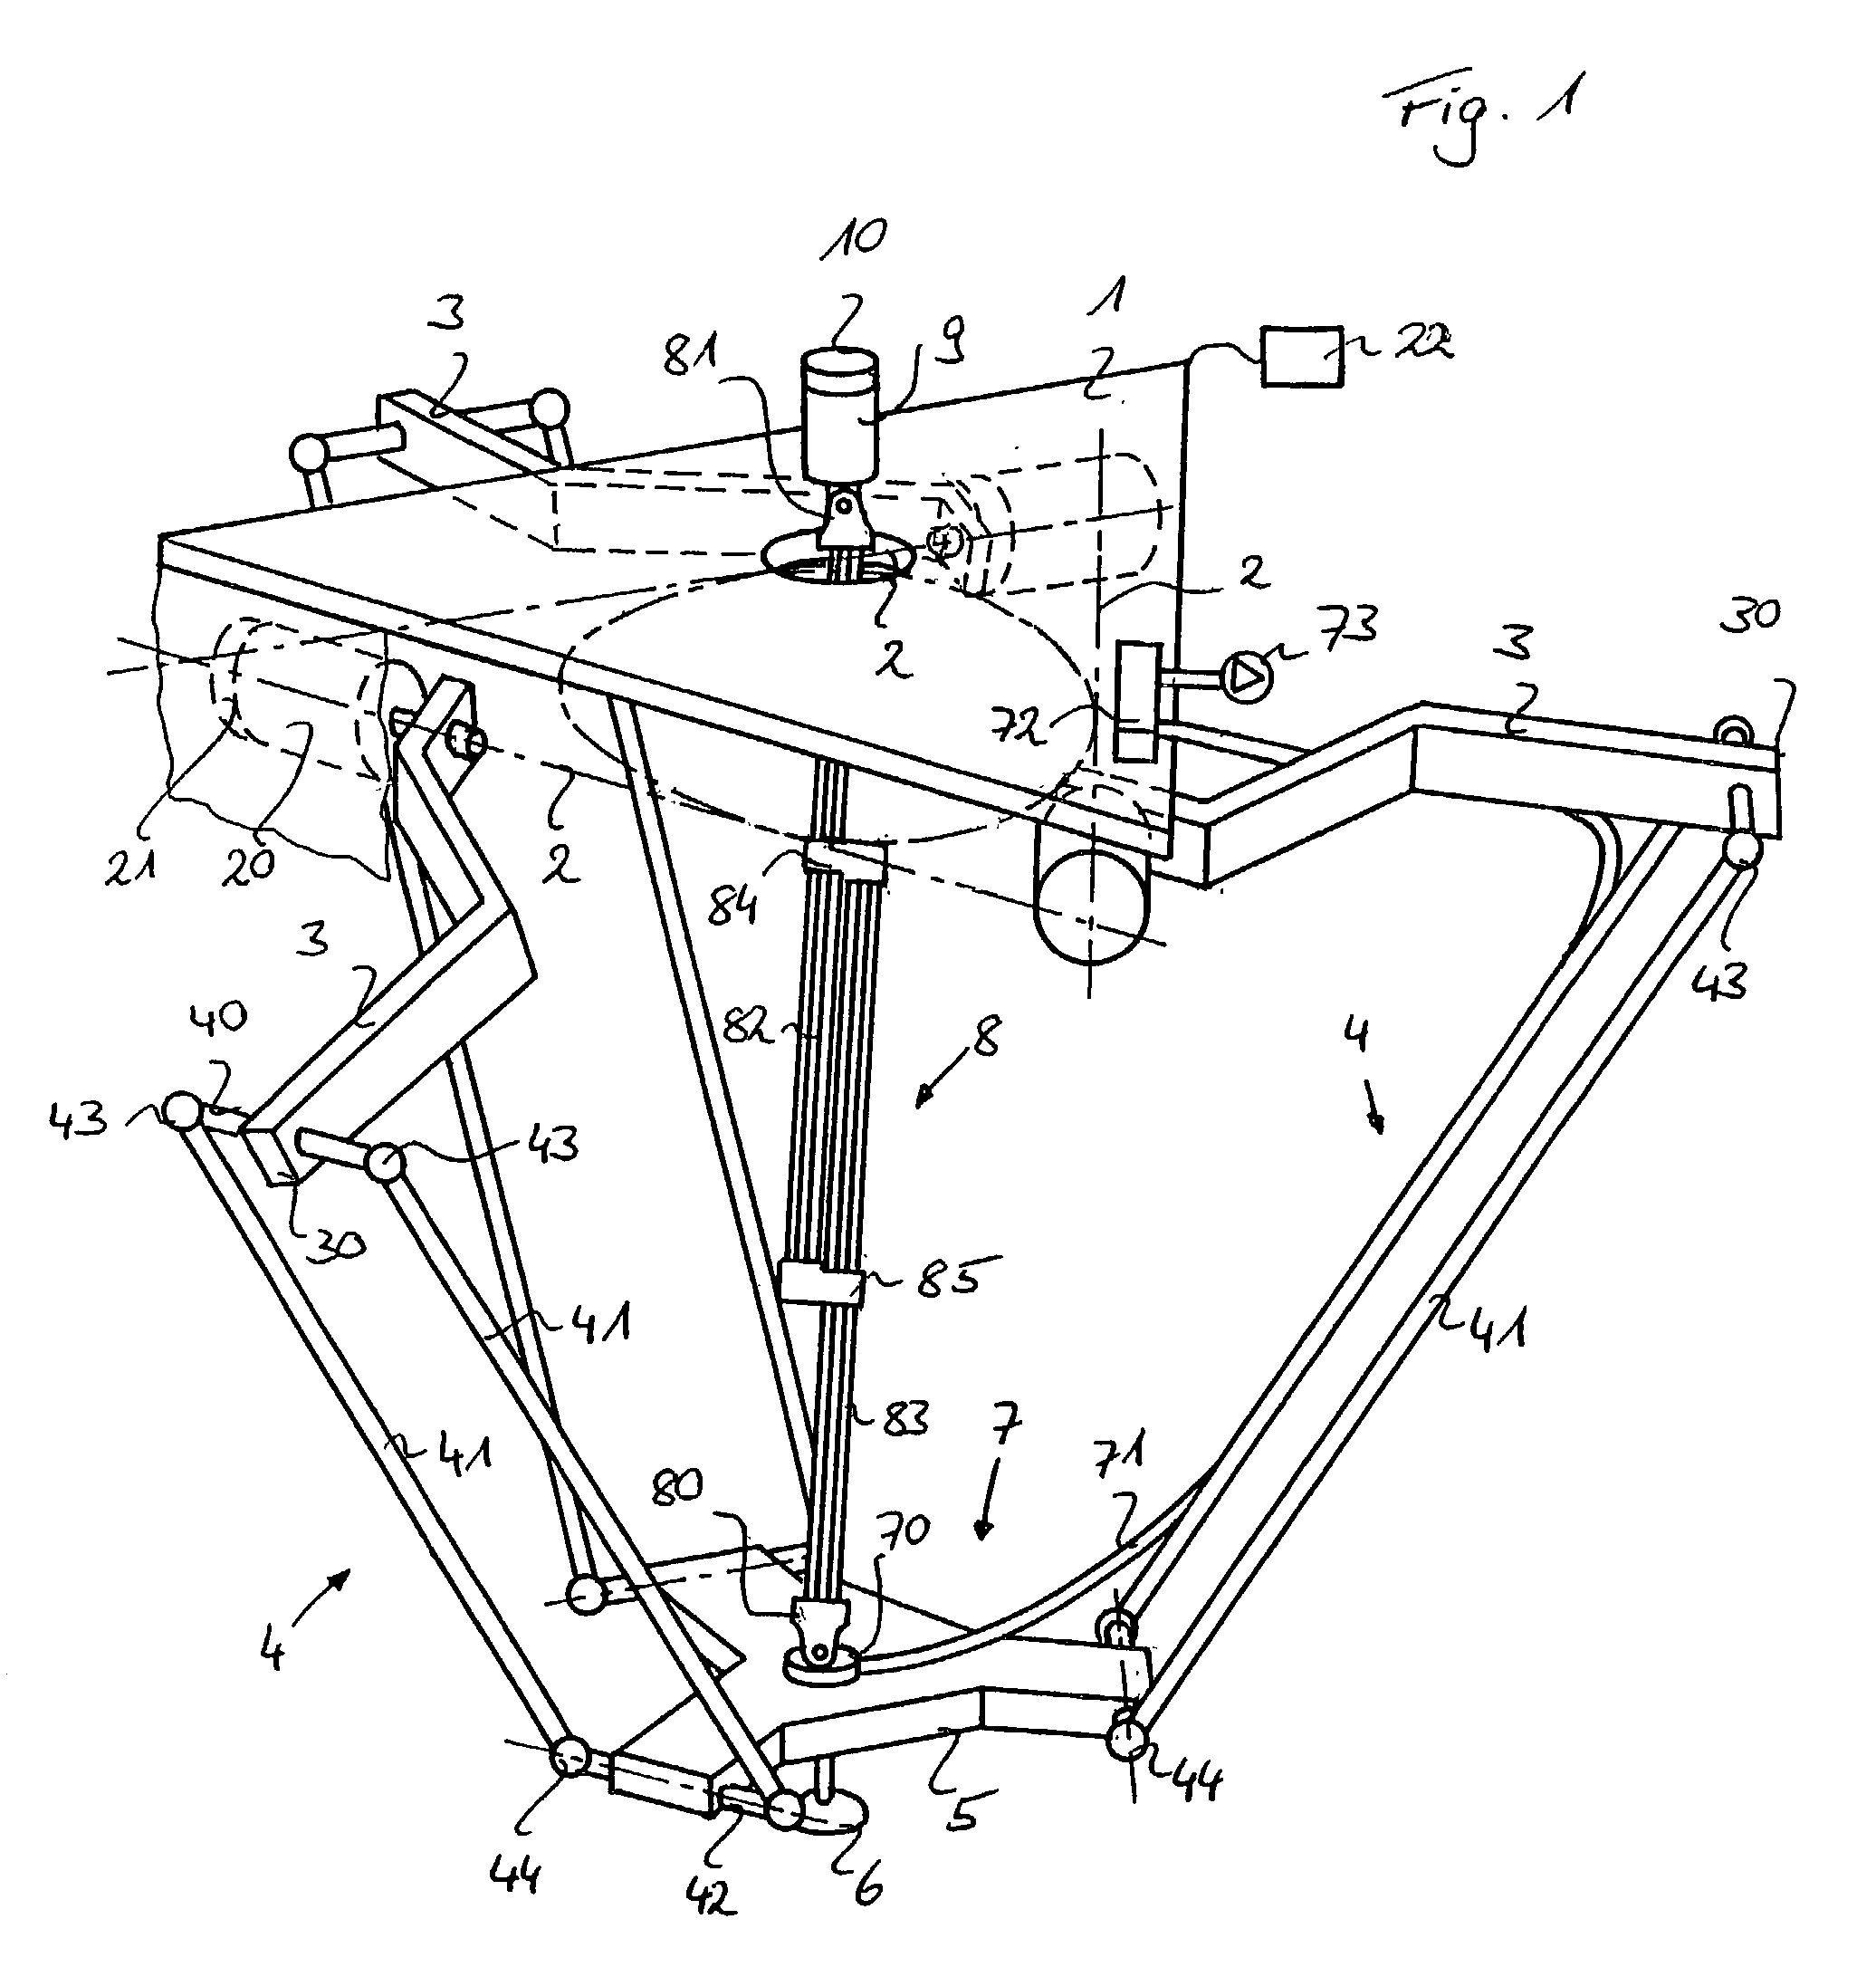 Device for transmitting torques